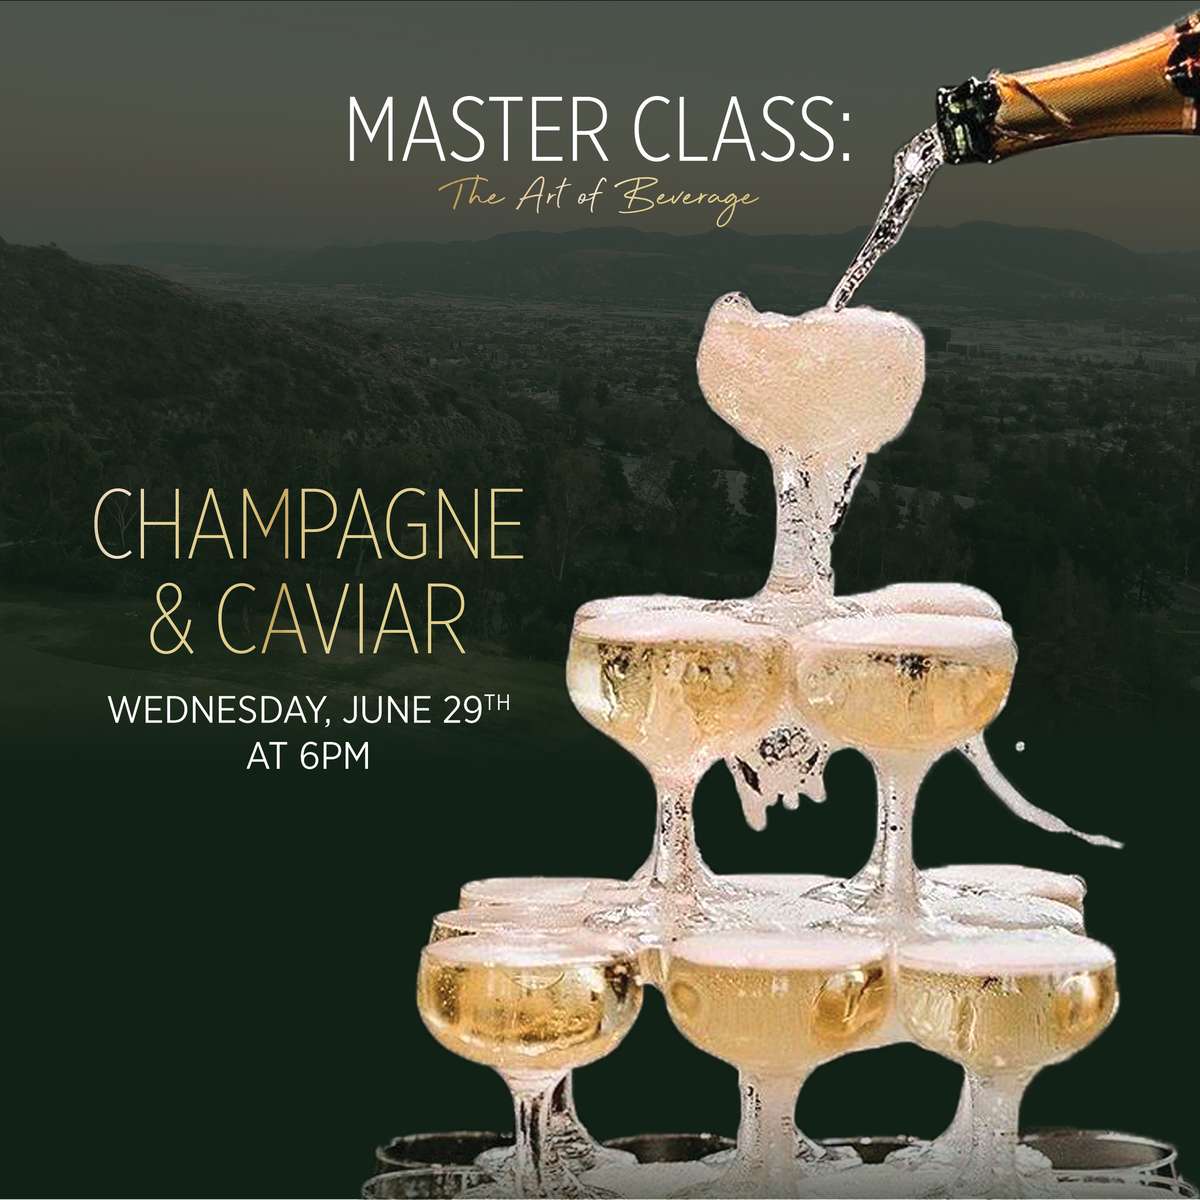 Masterclass the art of beverage, champaigne & caviar wednesday june 29th at 6pm